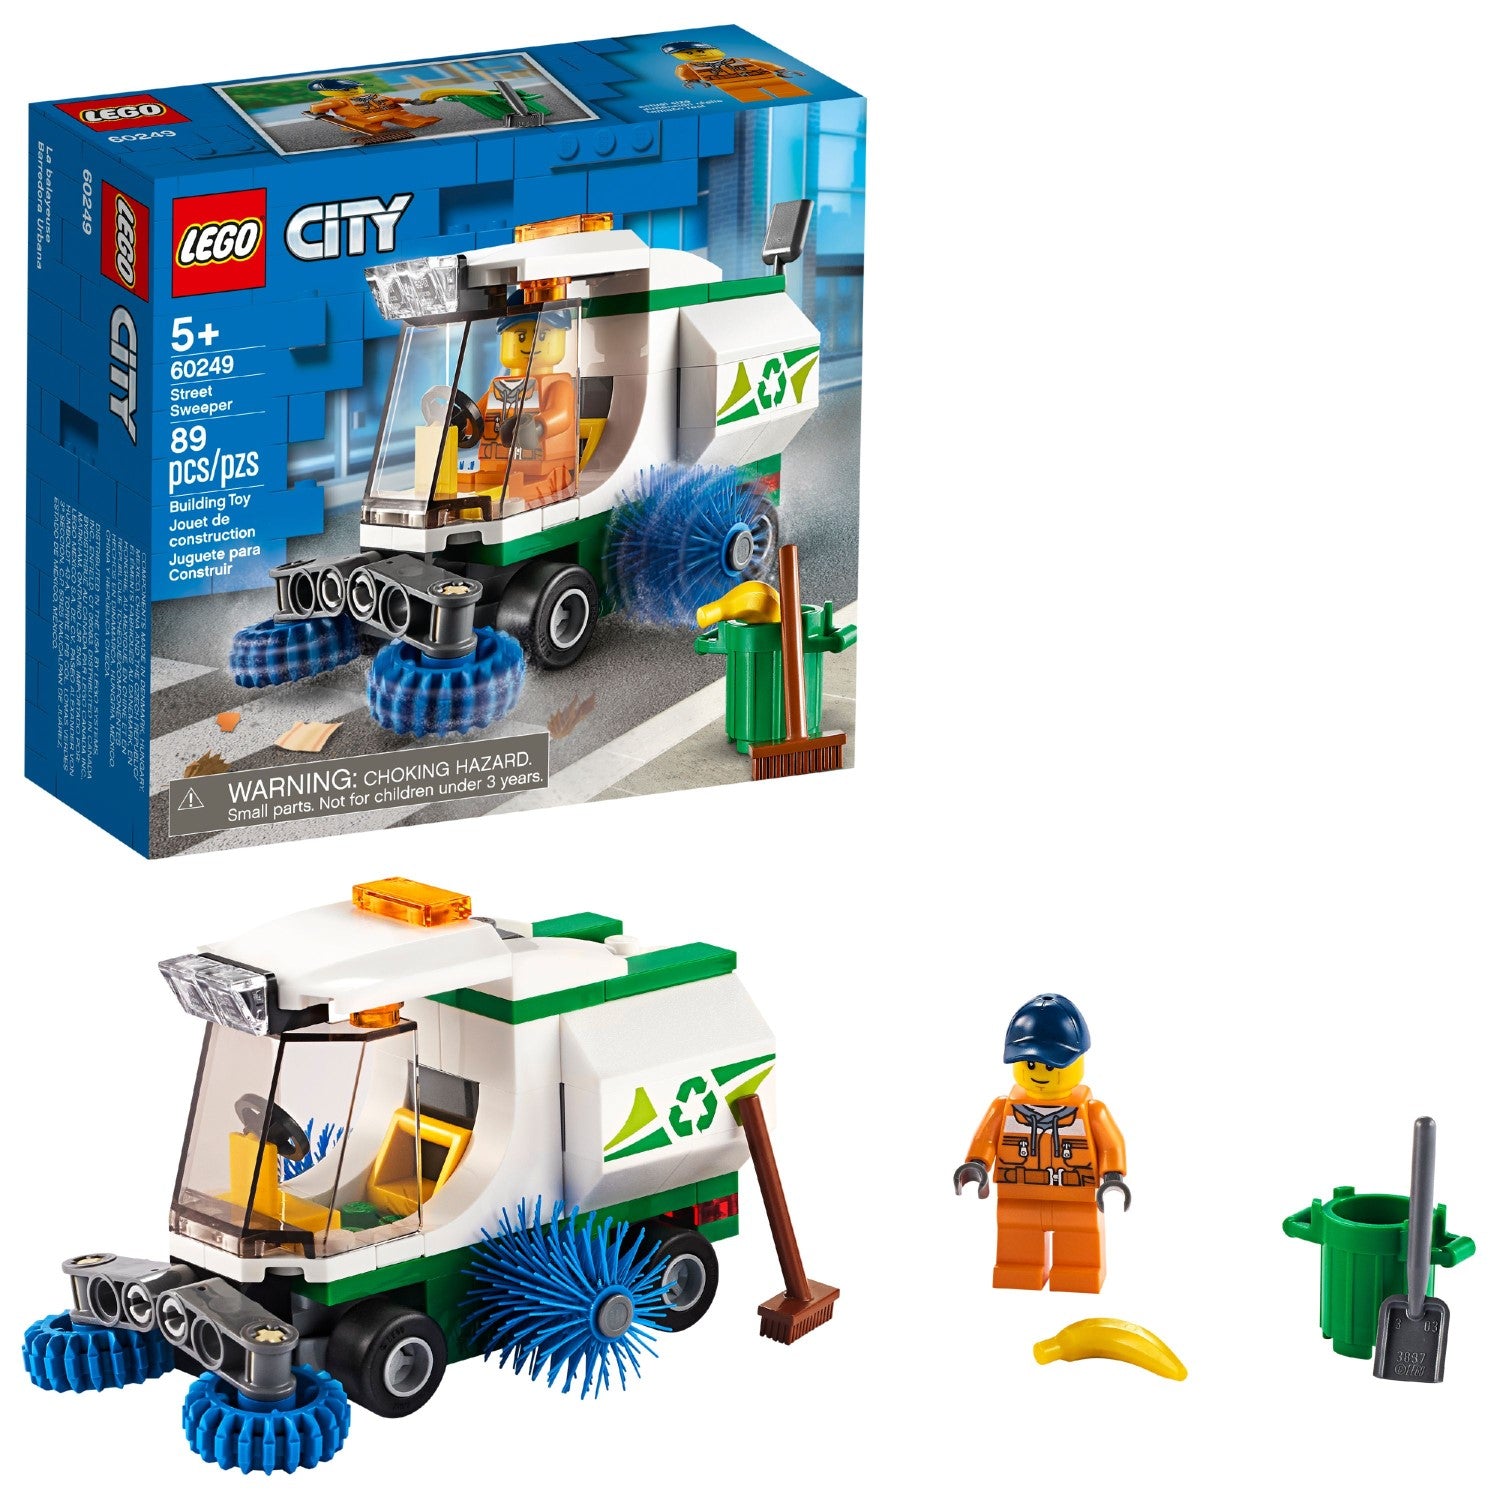 Scully Awaken Ellers Lego City Super Pack 2 in 1 66637 Building Toy for Kids 173 Pieces –  moongoodsusa